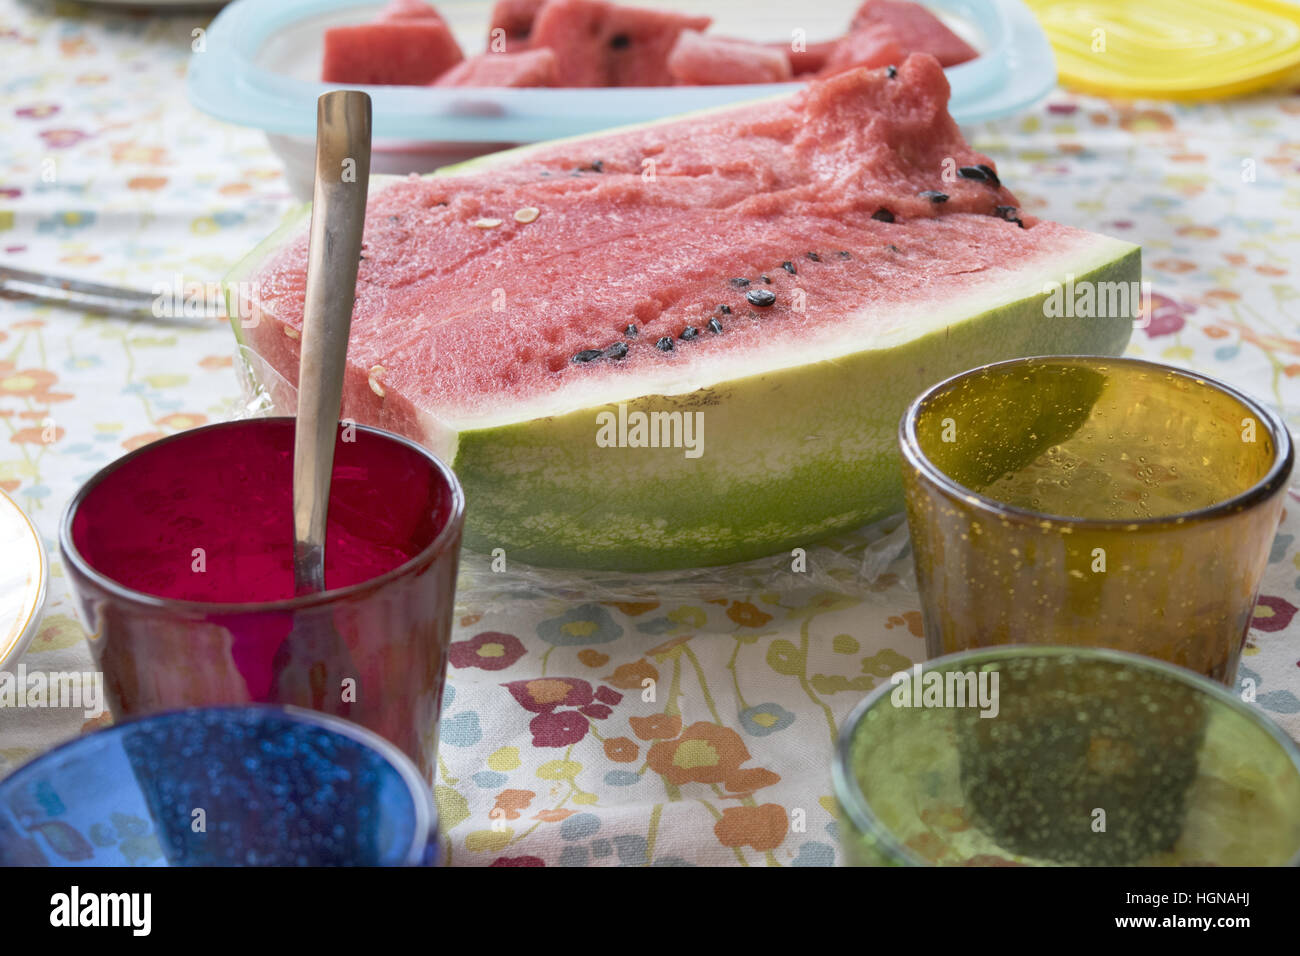 watermelon cut half on a set table at lunch end Stock Photo